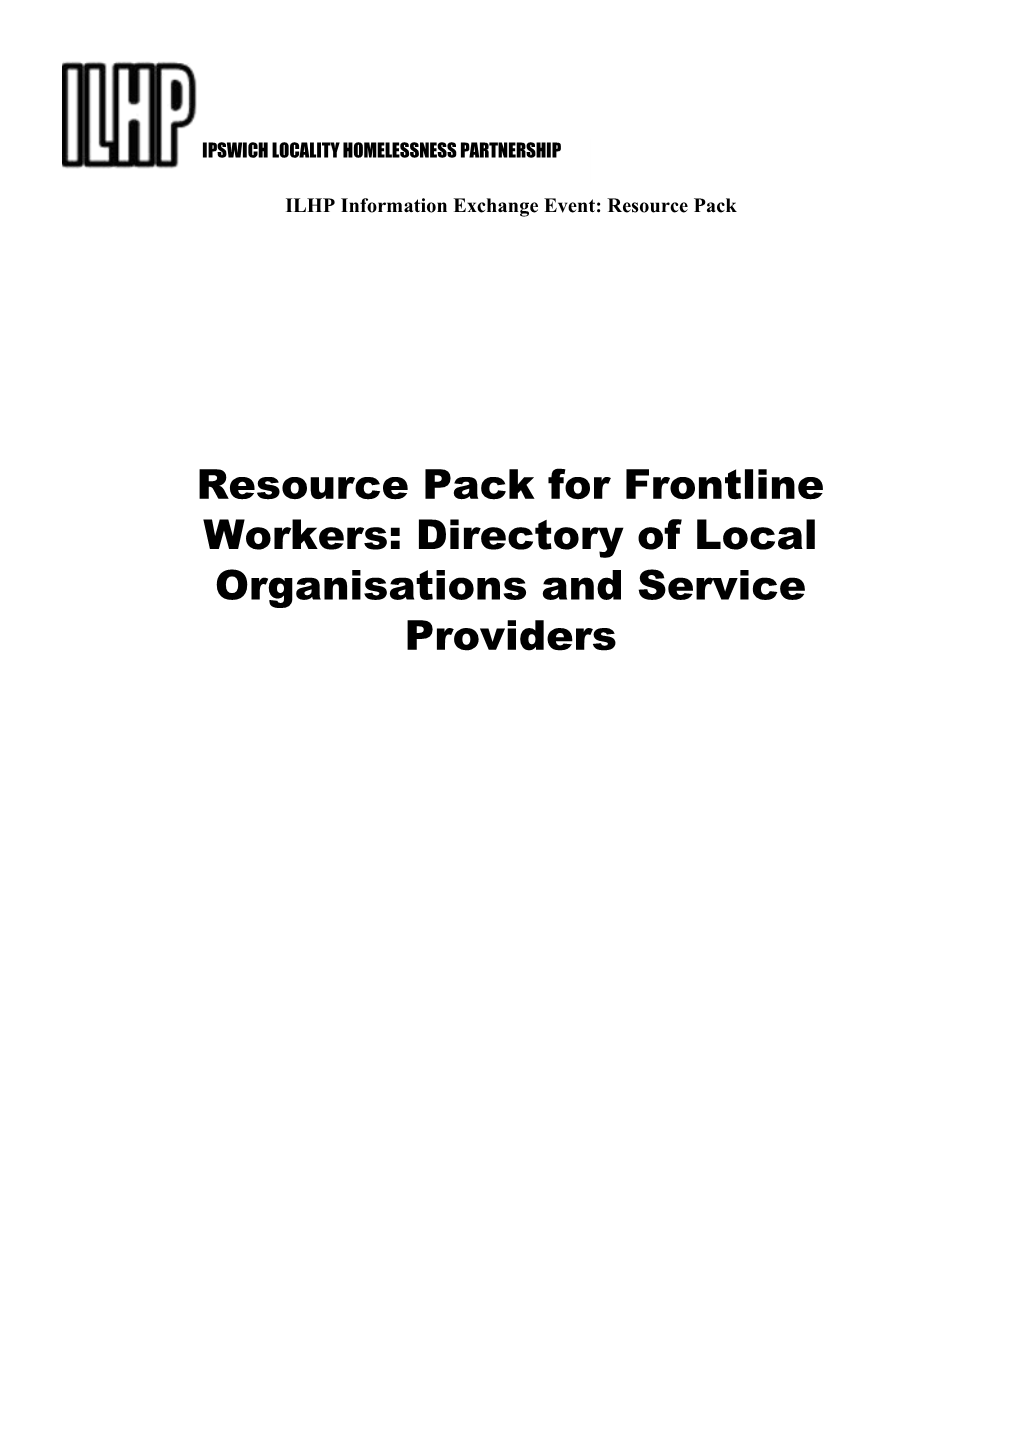 Resource Pack for Frontline Workers: Directory of Local Organisations and Service Providers